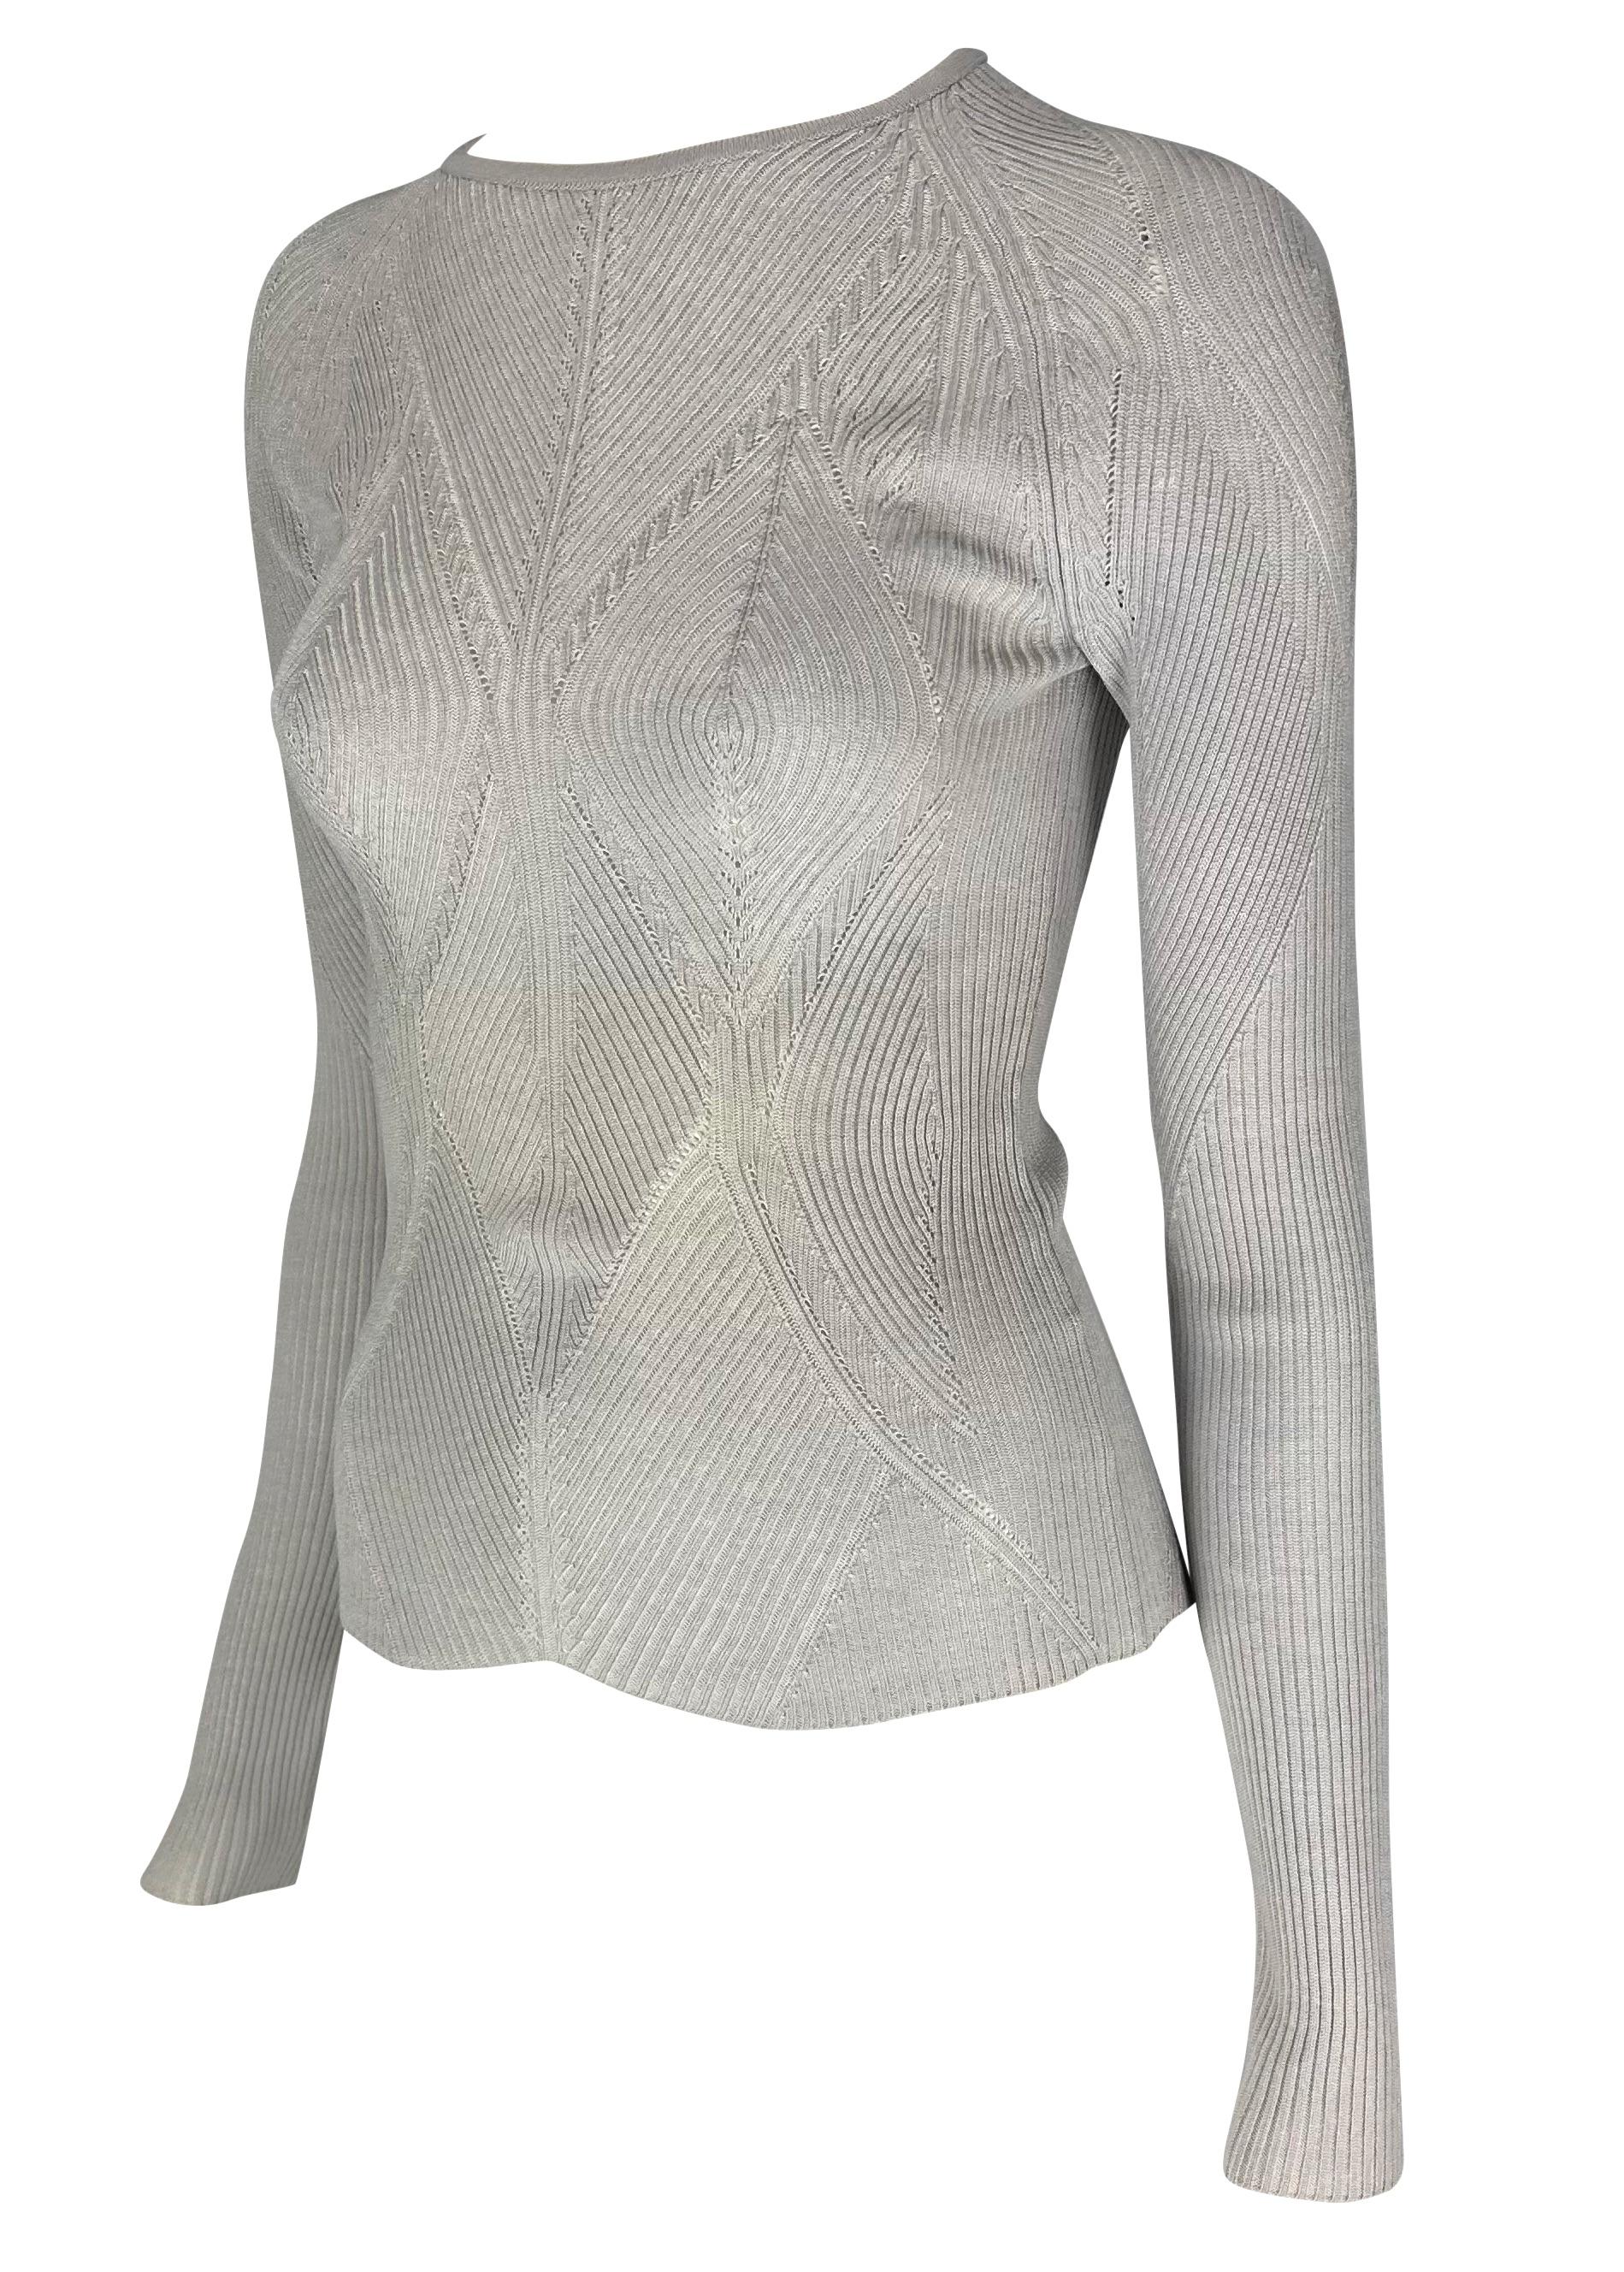 S/S 2003 Yves Saint Laurent by Tom Ford Breast Knit Stretch Lavender Sweater Top In Excellent Condition In West Hollywood, CA